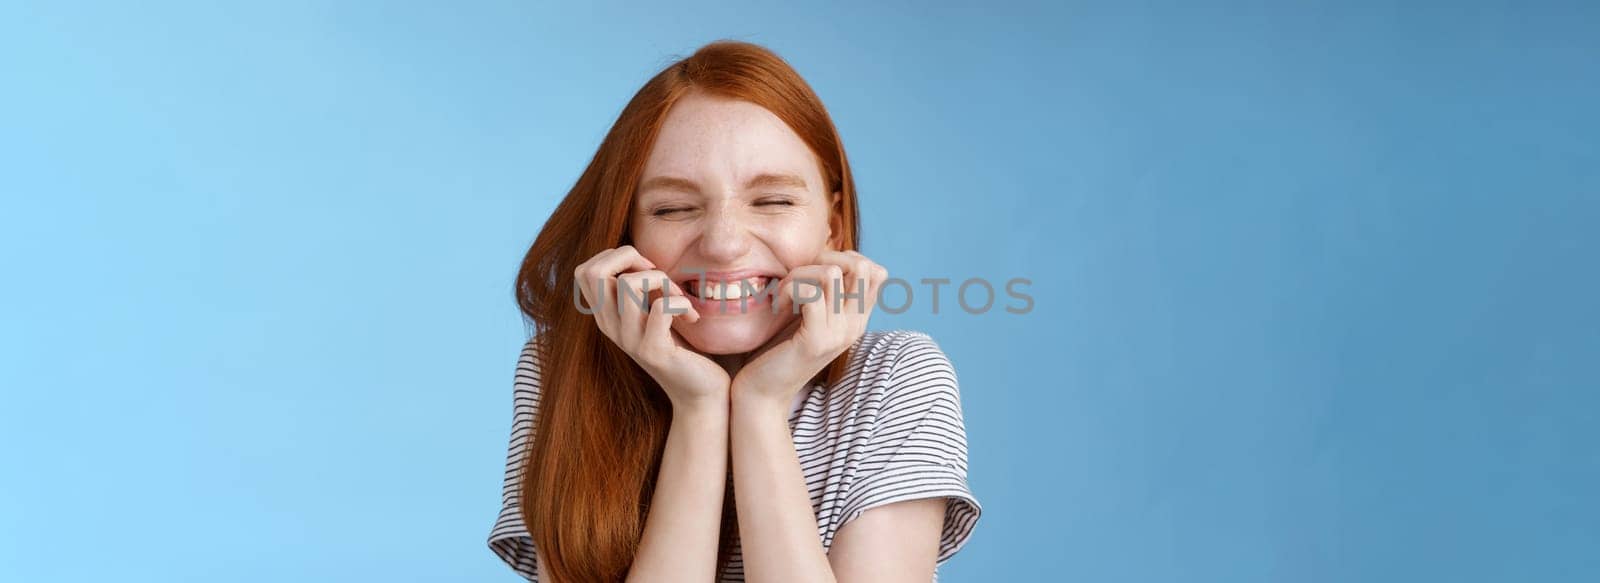 Cheerful carefree giggling ginger girl look happy bright close eyes smiling delighted hold hands cheeks having fun feeling excitement joy triumphing cheering good news, standing blue background.